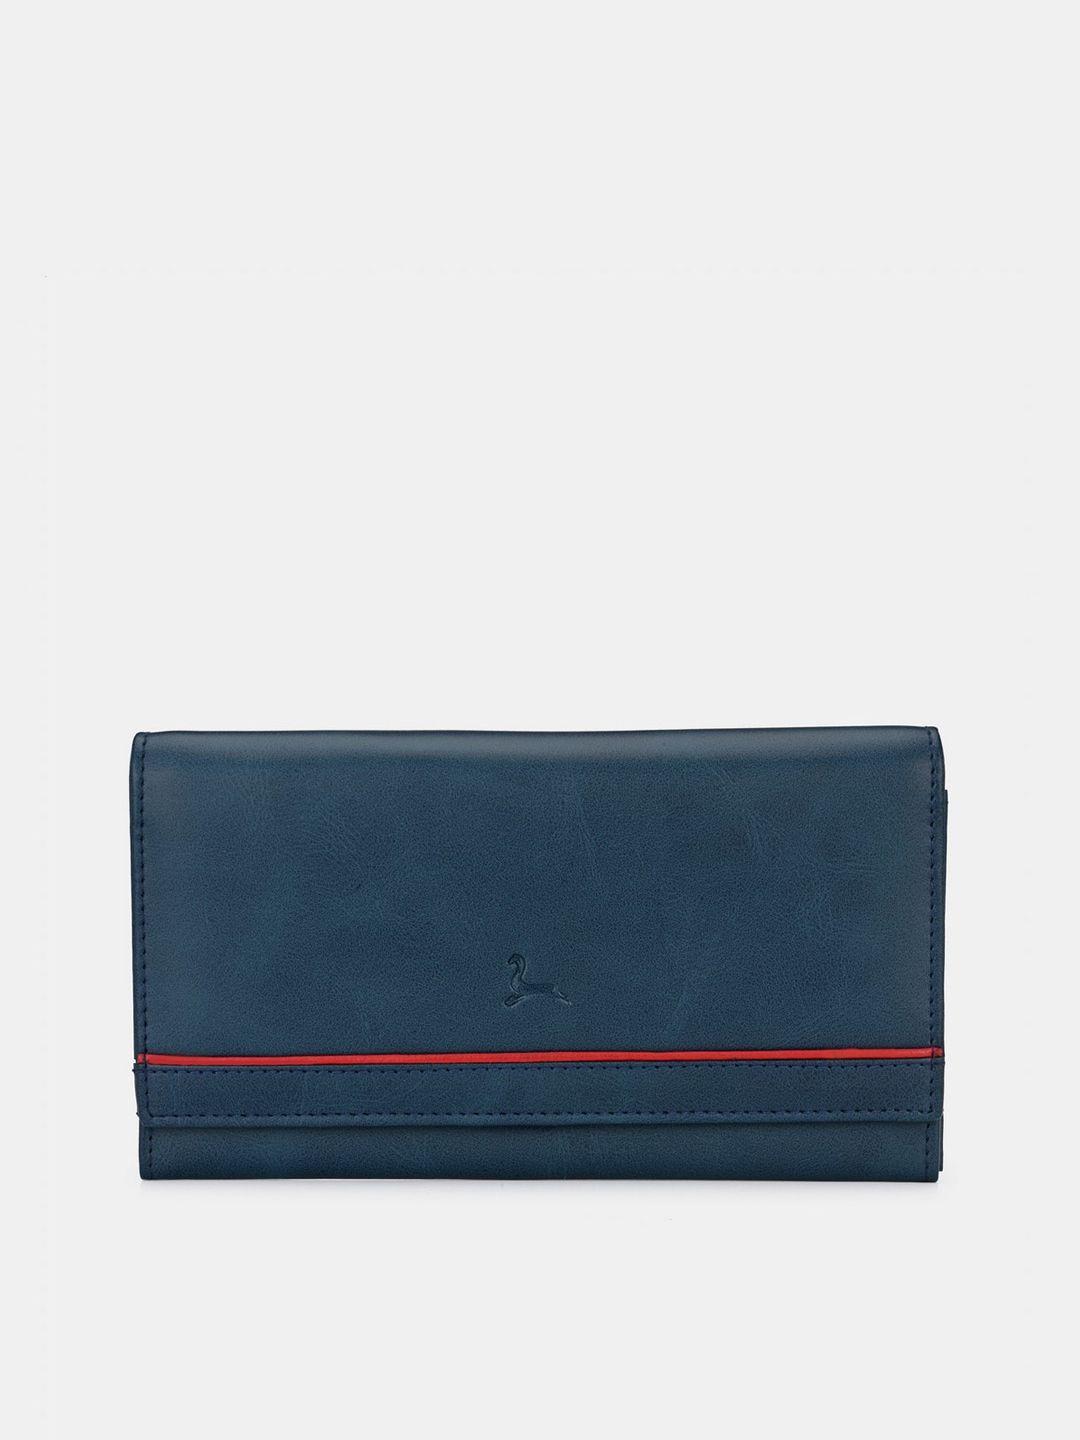 pacific gold women blue & red textured faux leather two fold wallet